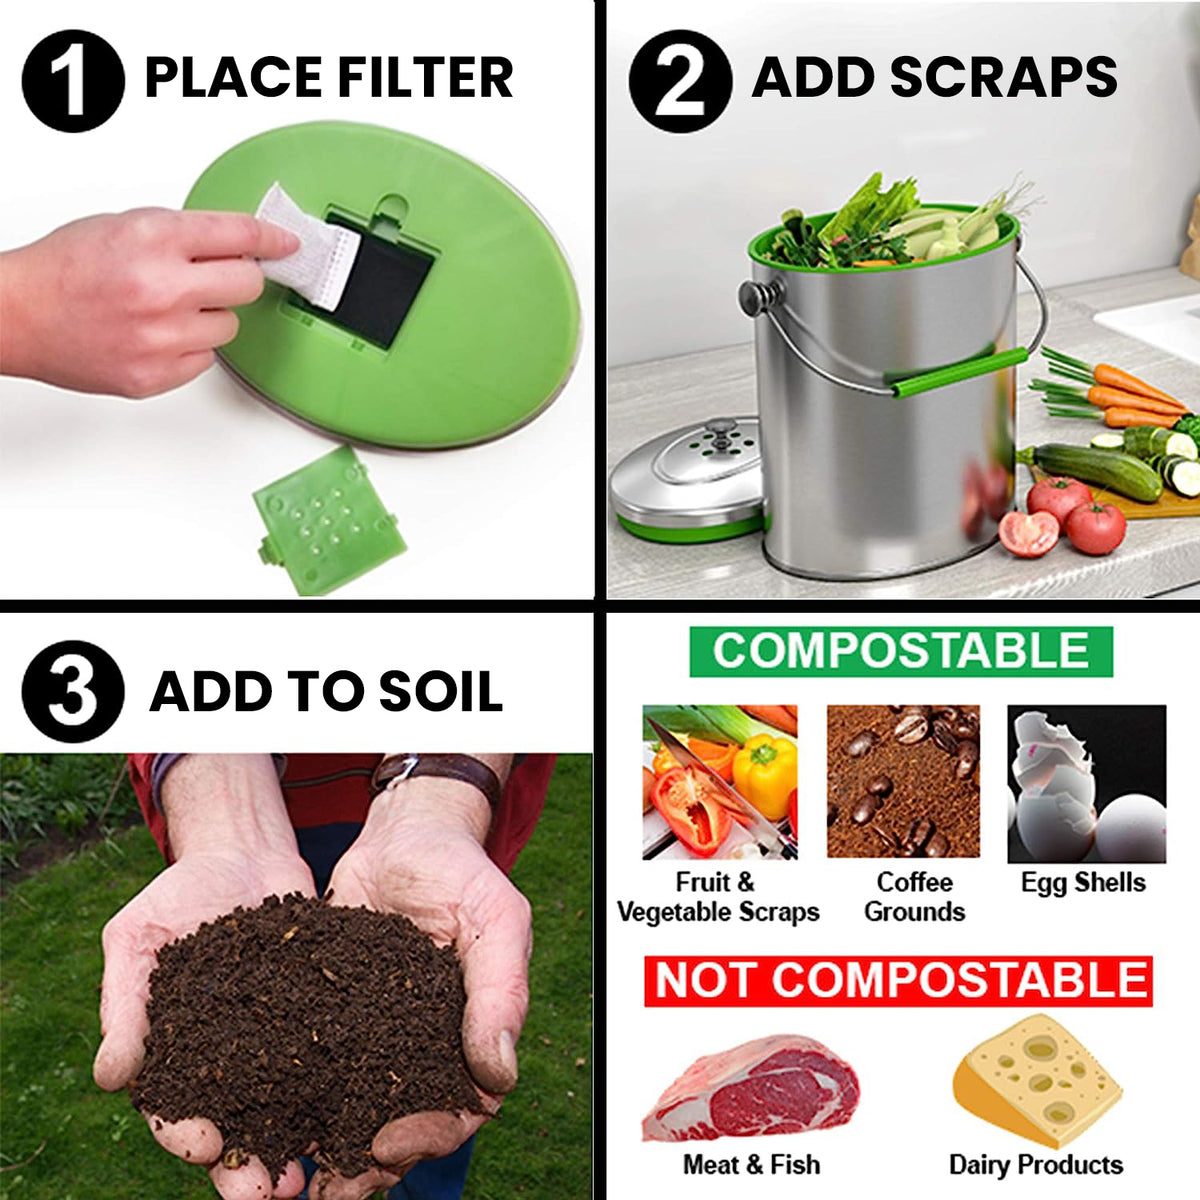 iTouchless 1.6 Gallon / 6.1 Liter Titanium Stainless Steel Compost Bin with Odor Filter steps to compost